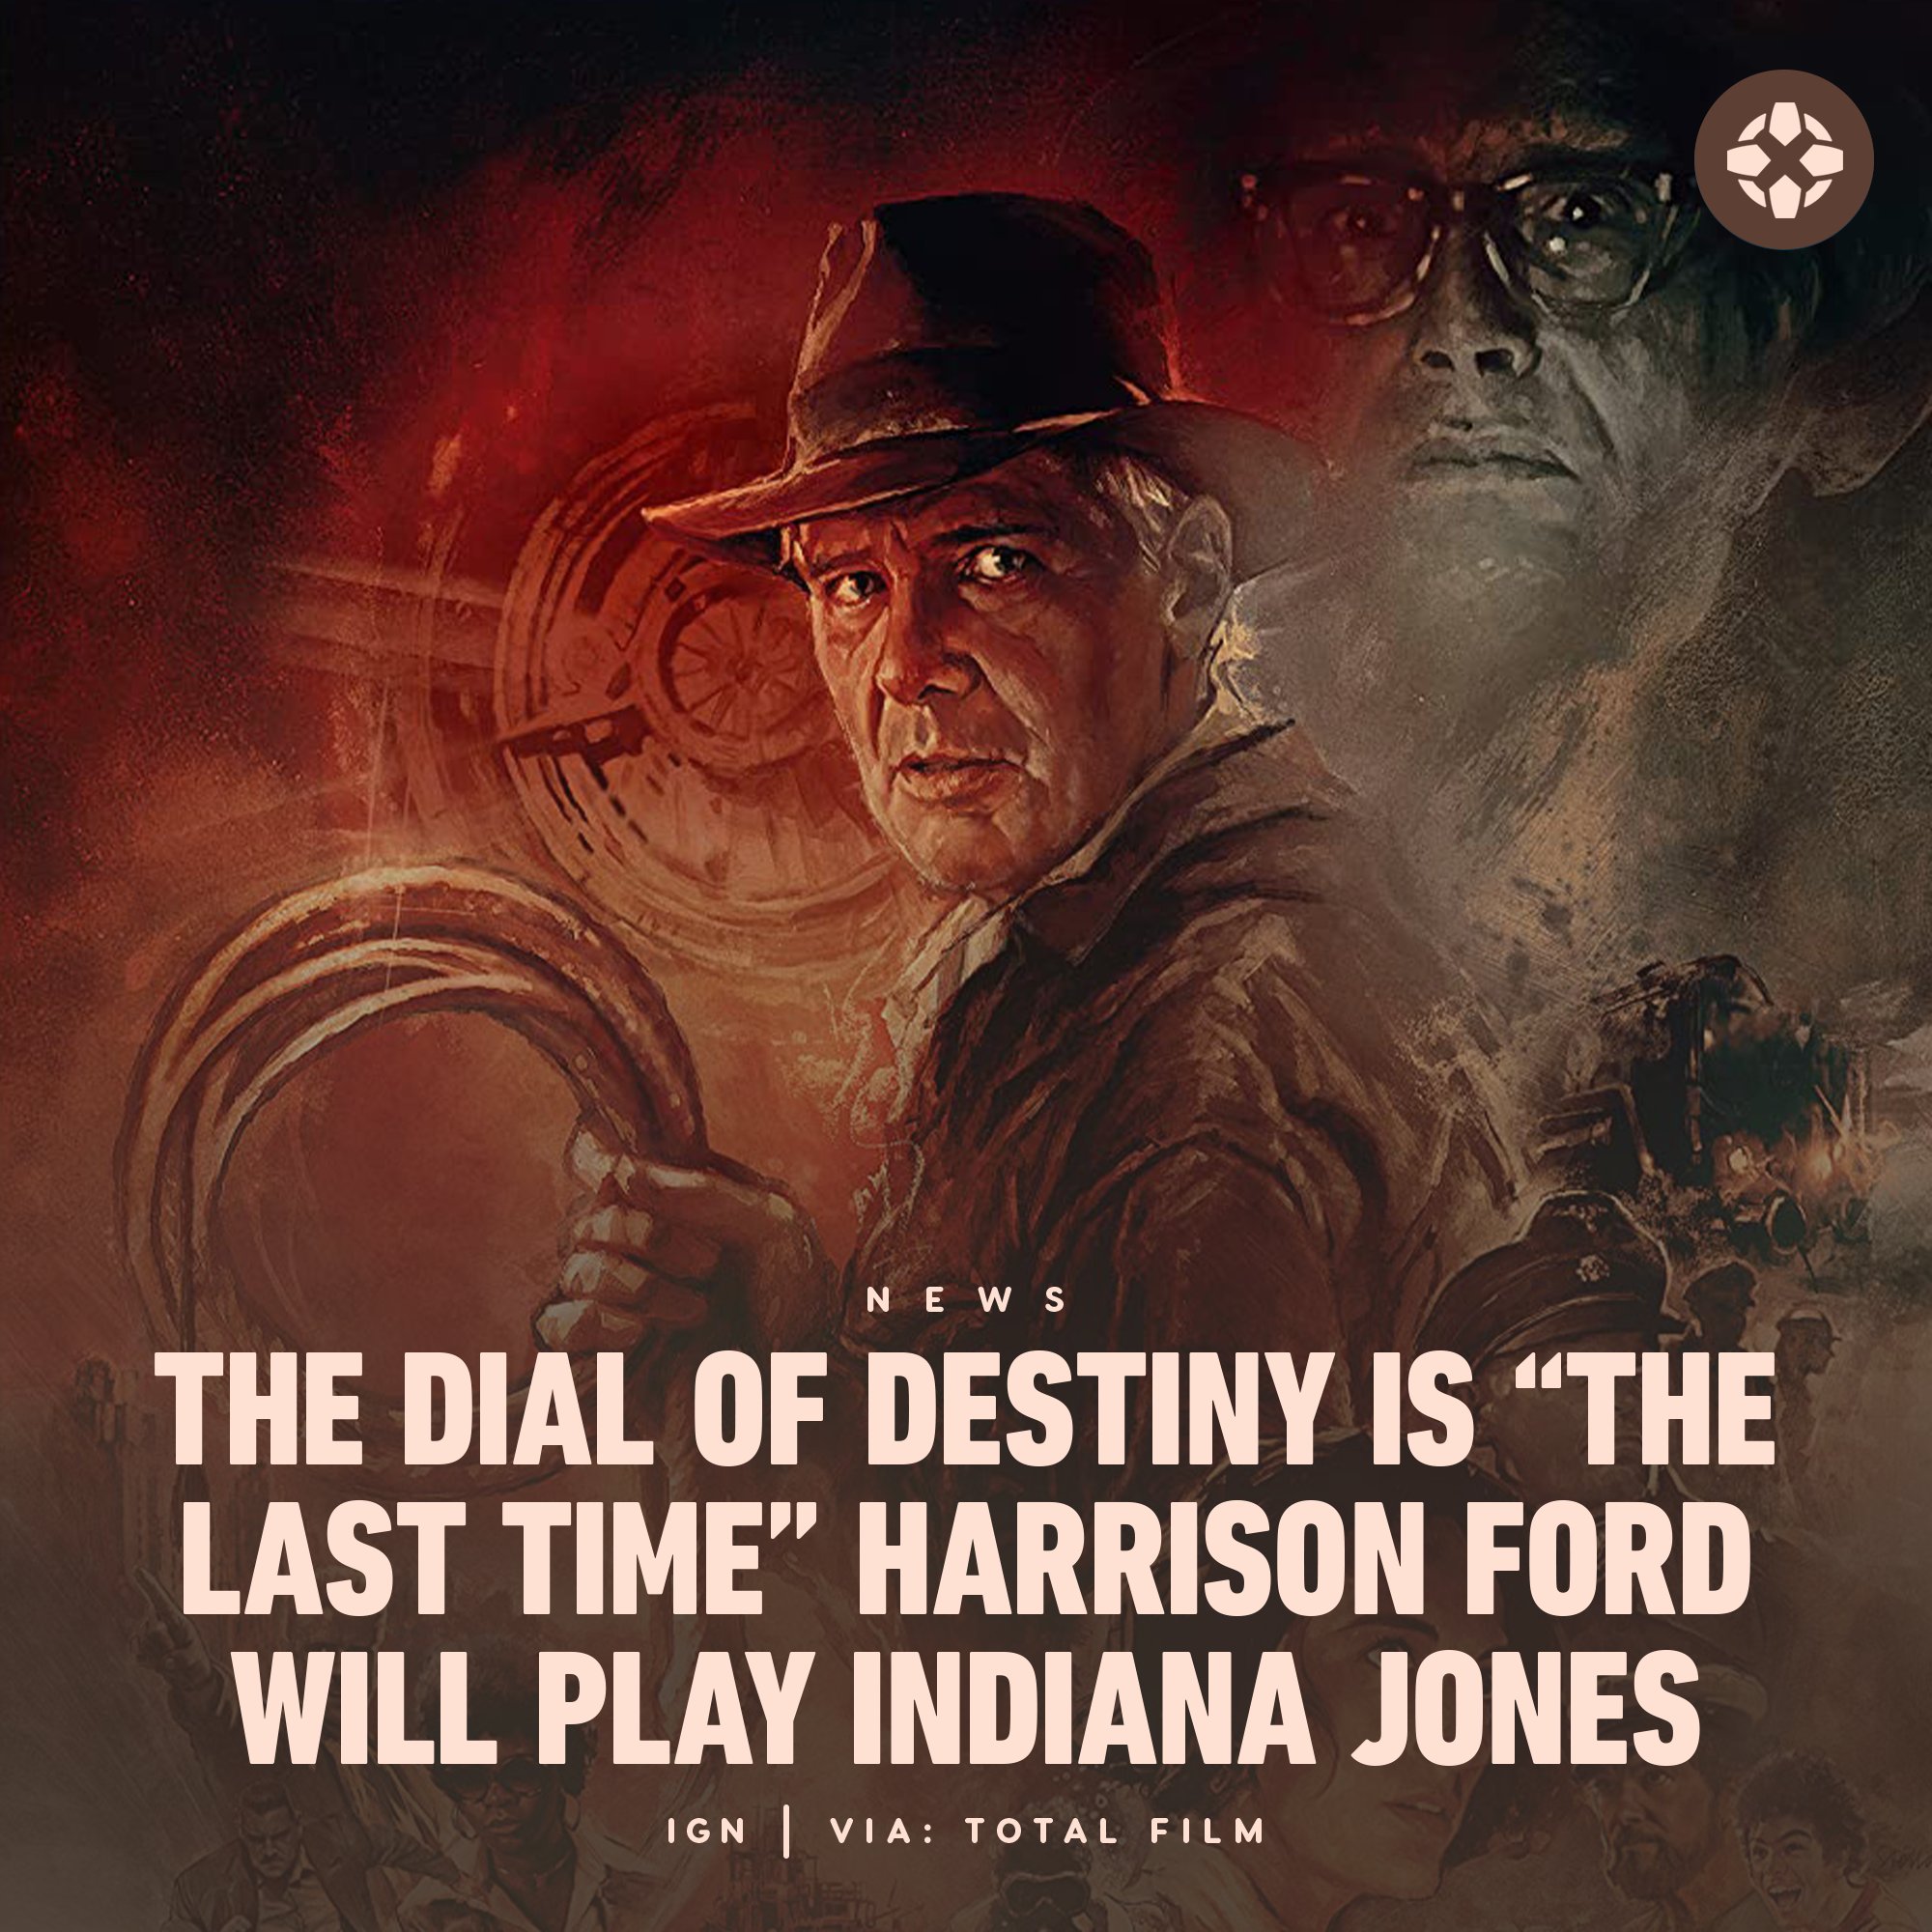 Indiana Jones and the Kingdom of the Crystal Skull - IGN